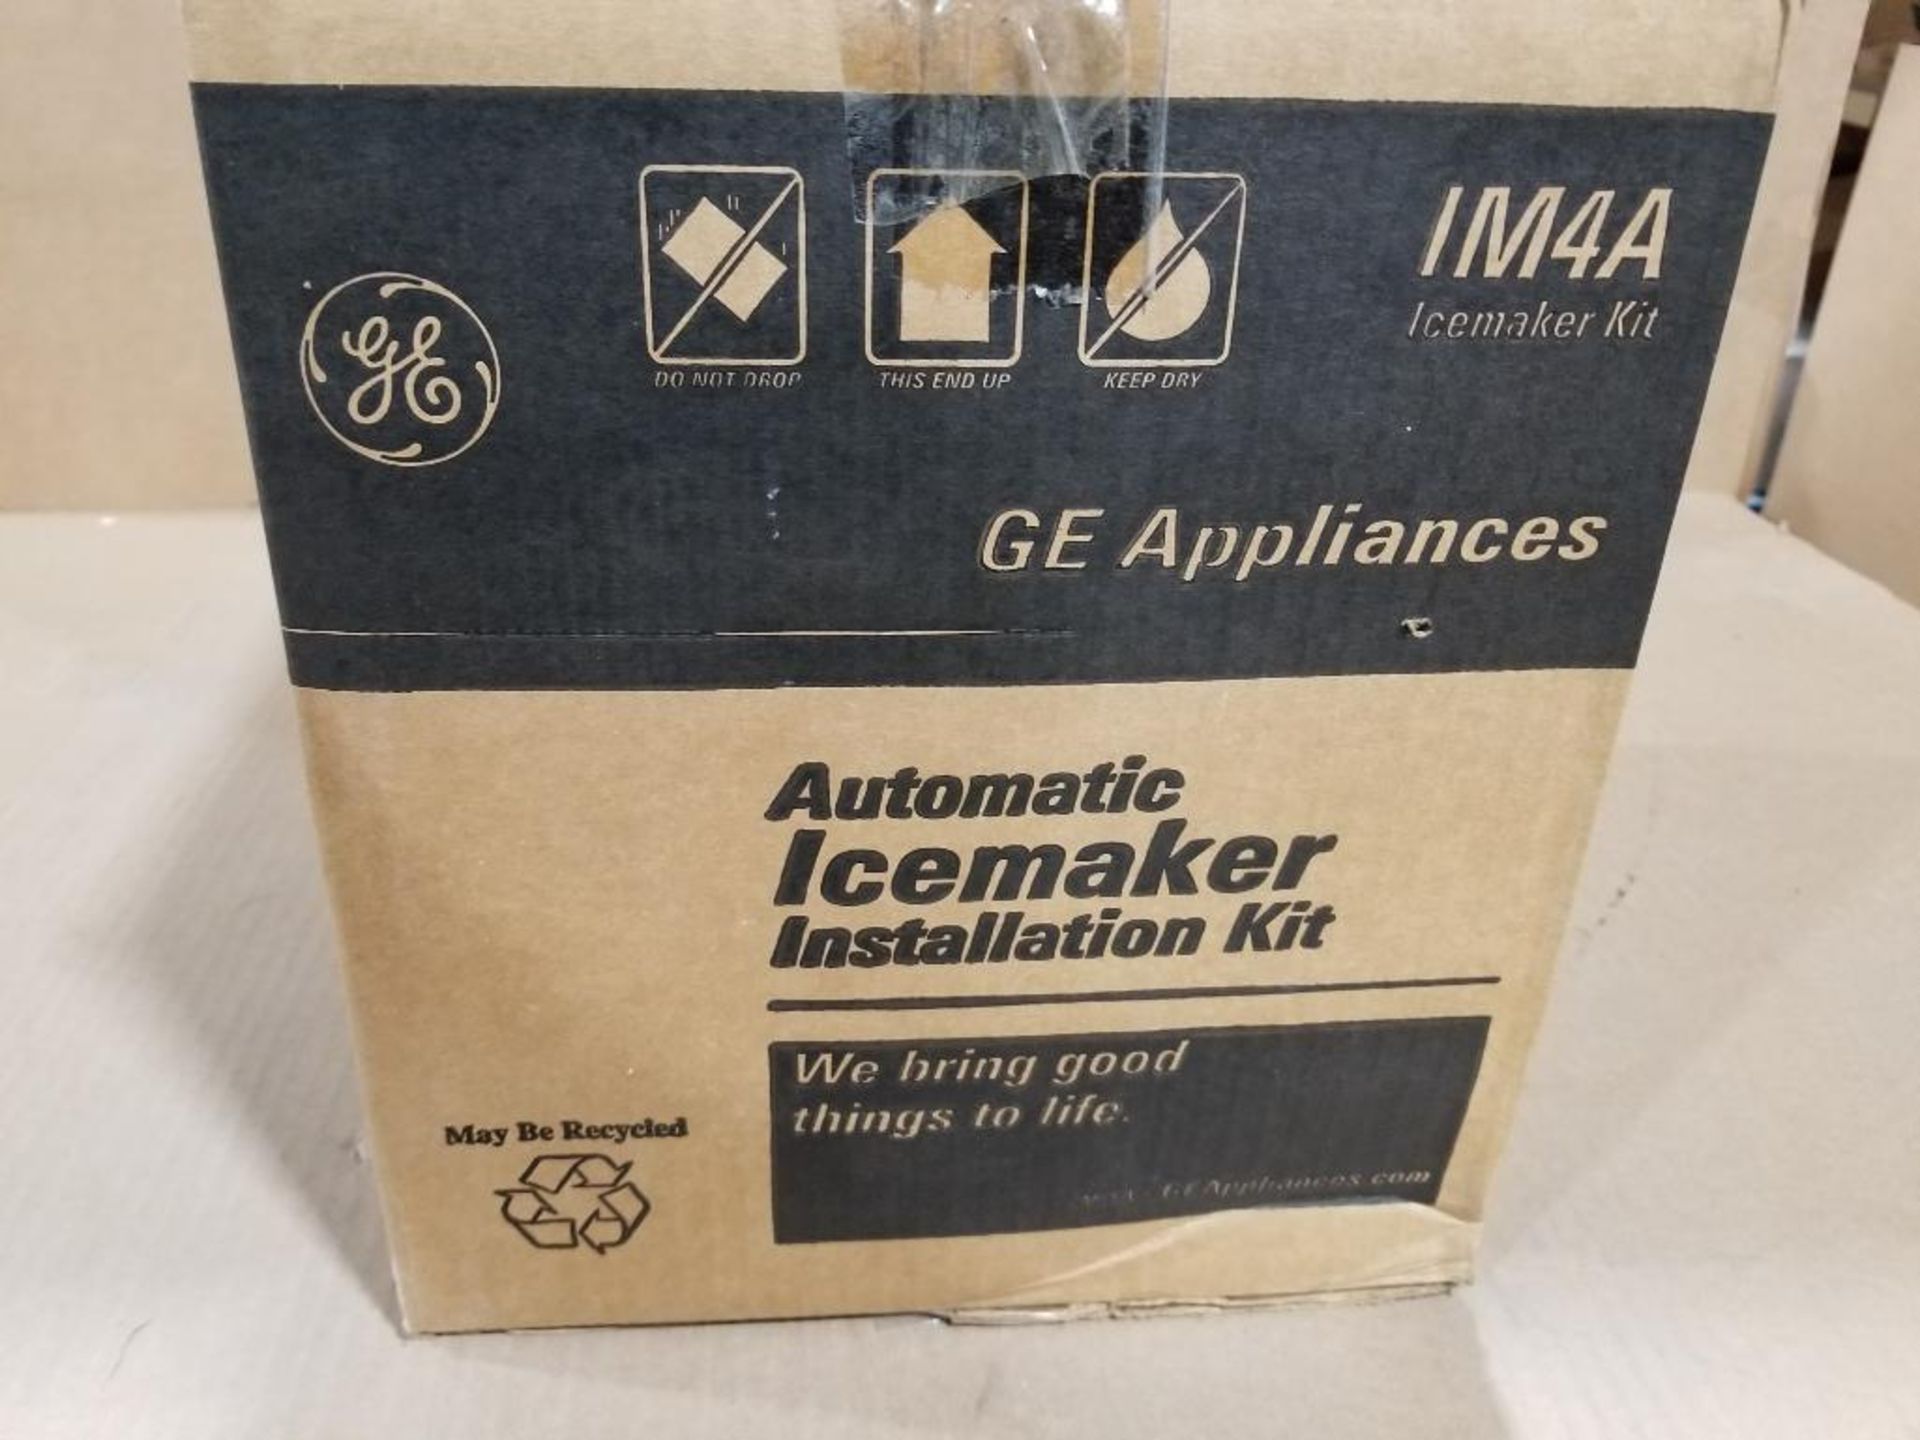 GE automatic icemaker installation kit. Model IM4A. - Image 3 of 5